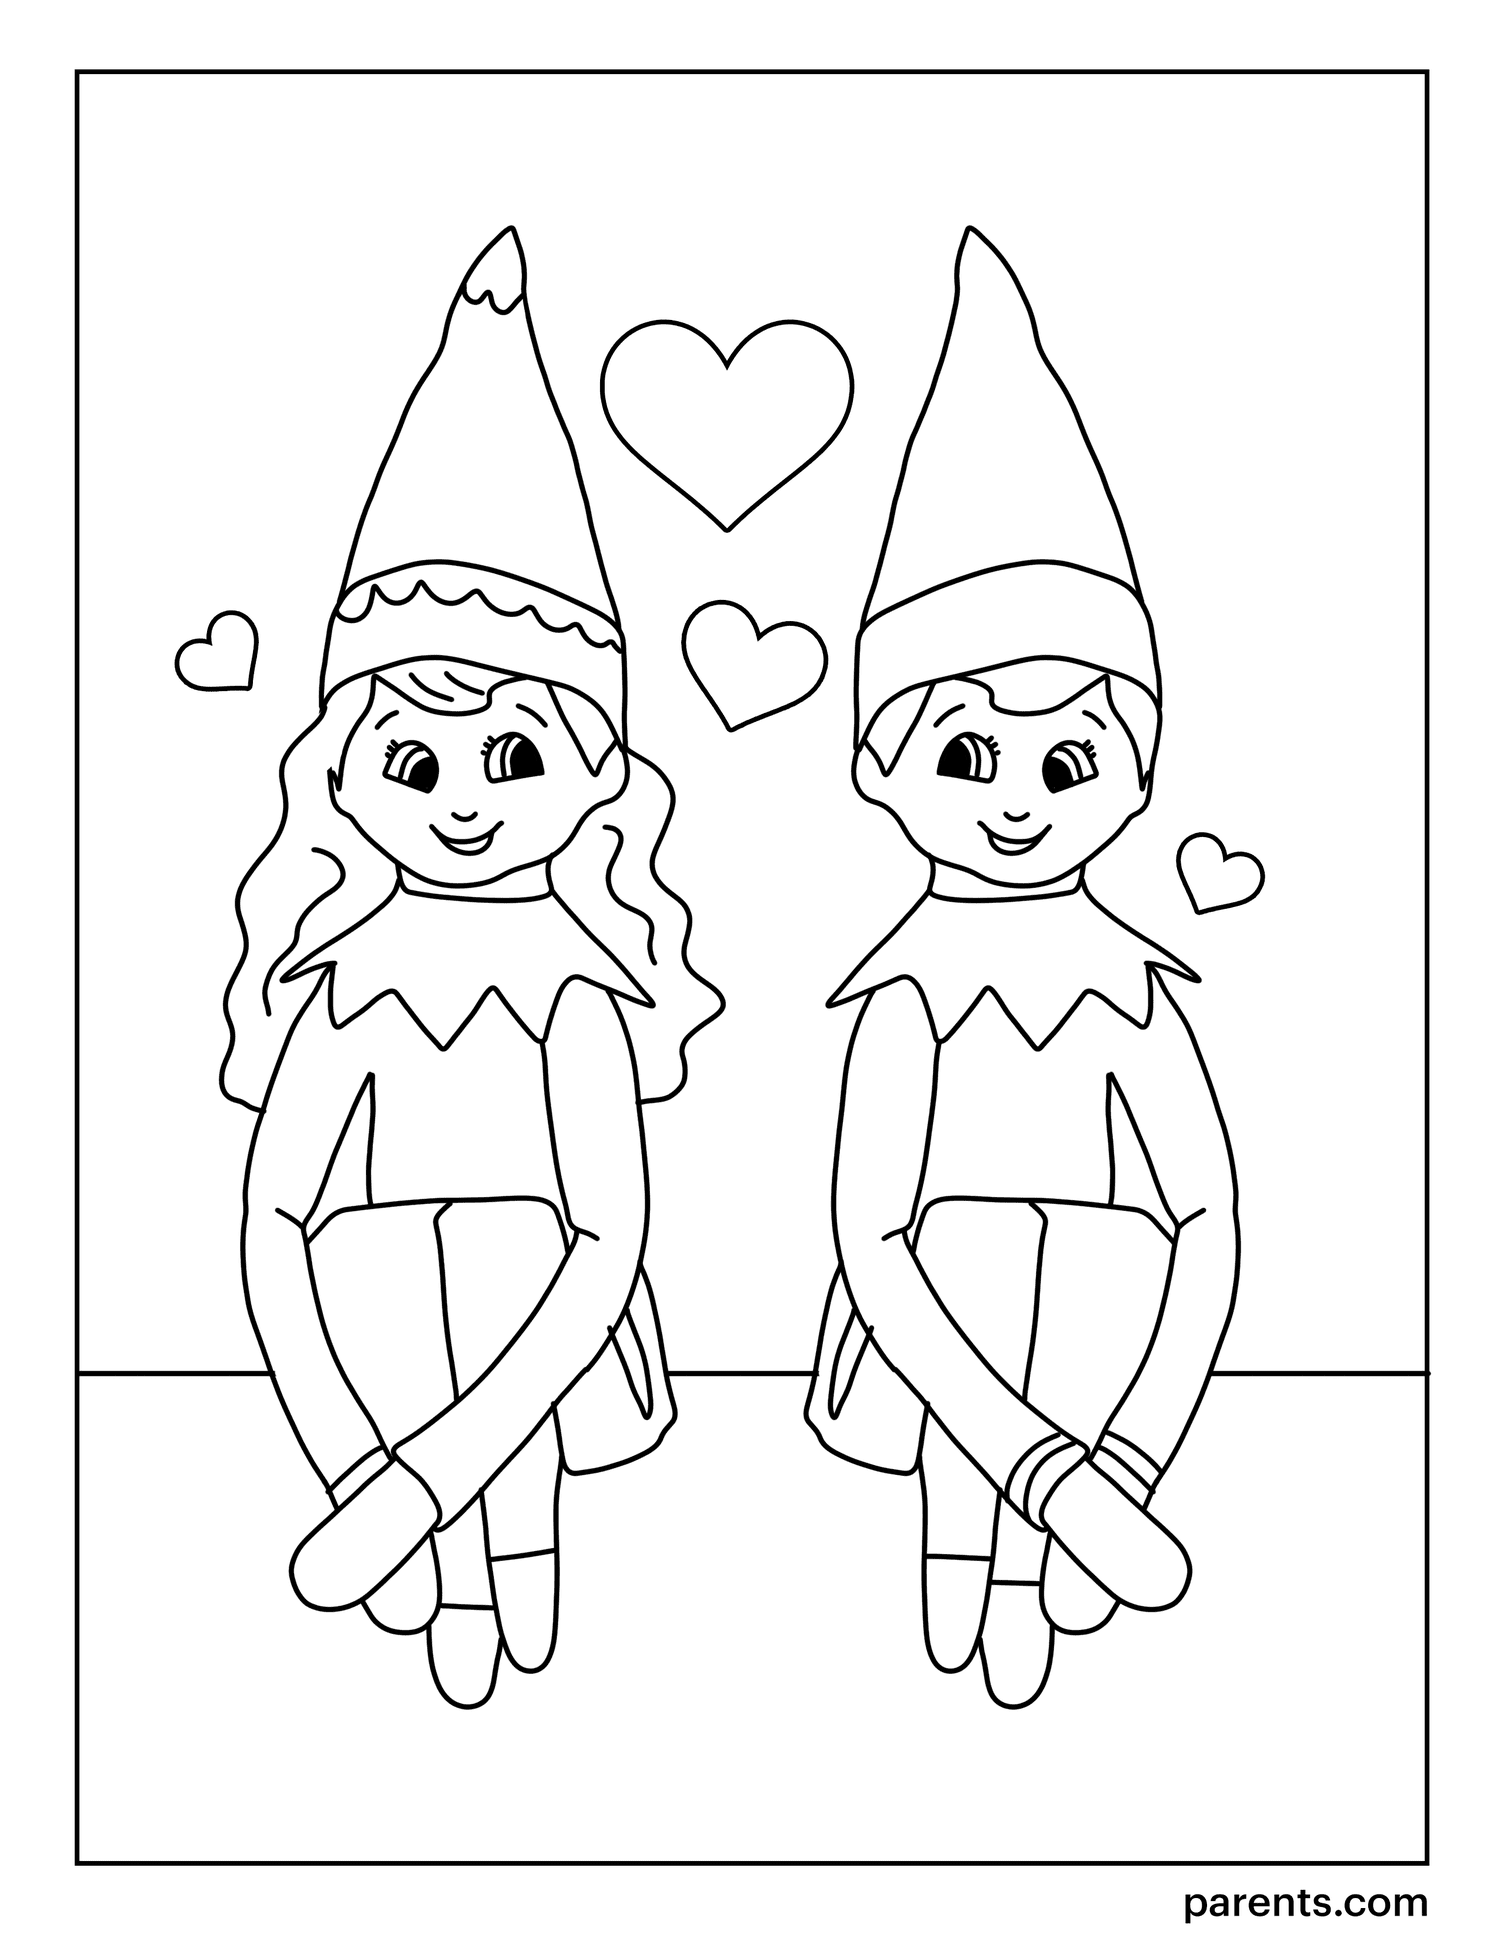 7 Elf on the Shelf Inspired Coloring Pages to Get Kids ...